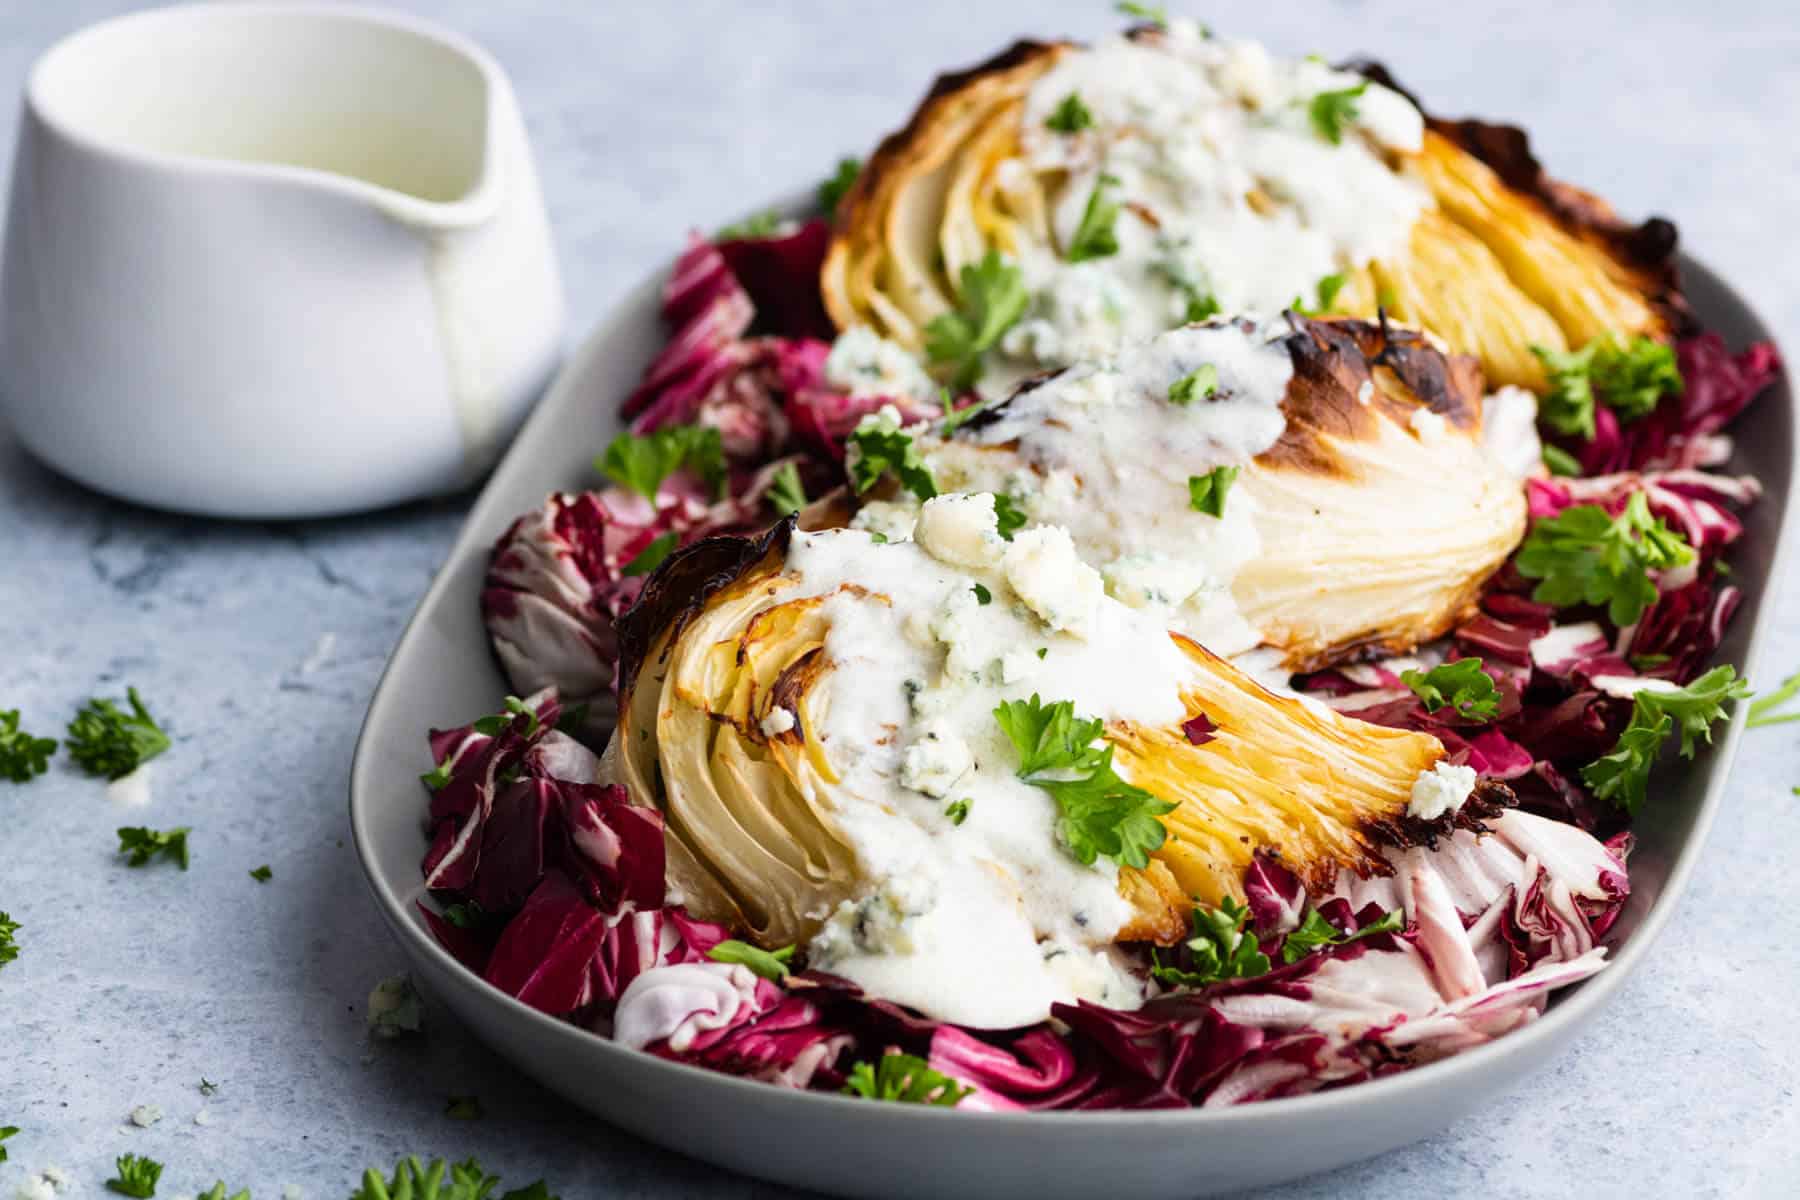 A platter holds roasted cabbage wedges topped with chunky blue cheese sauce all sitting on a bed of purple radicchio.